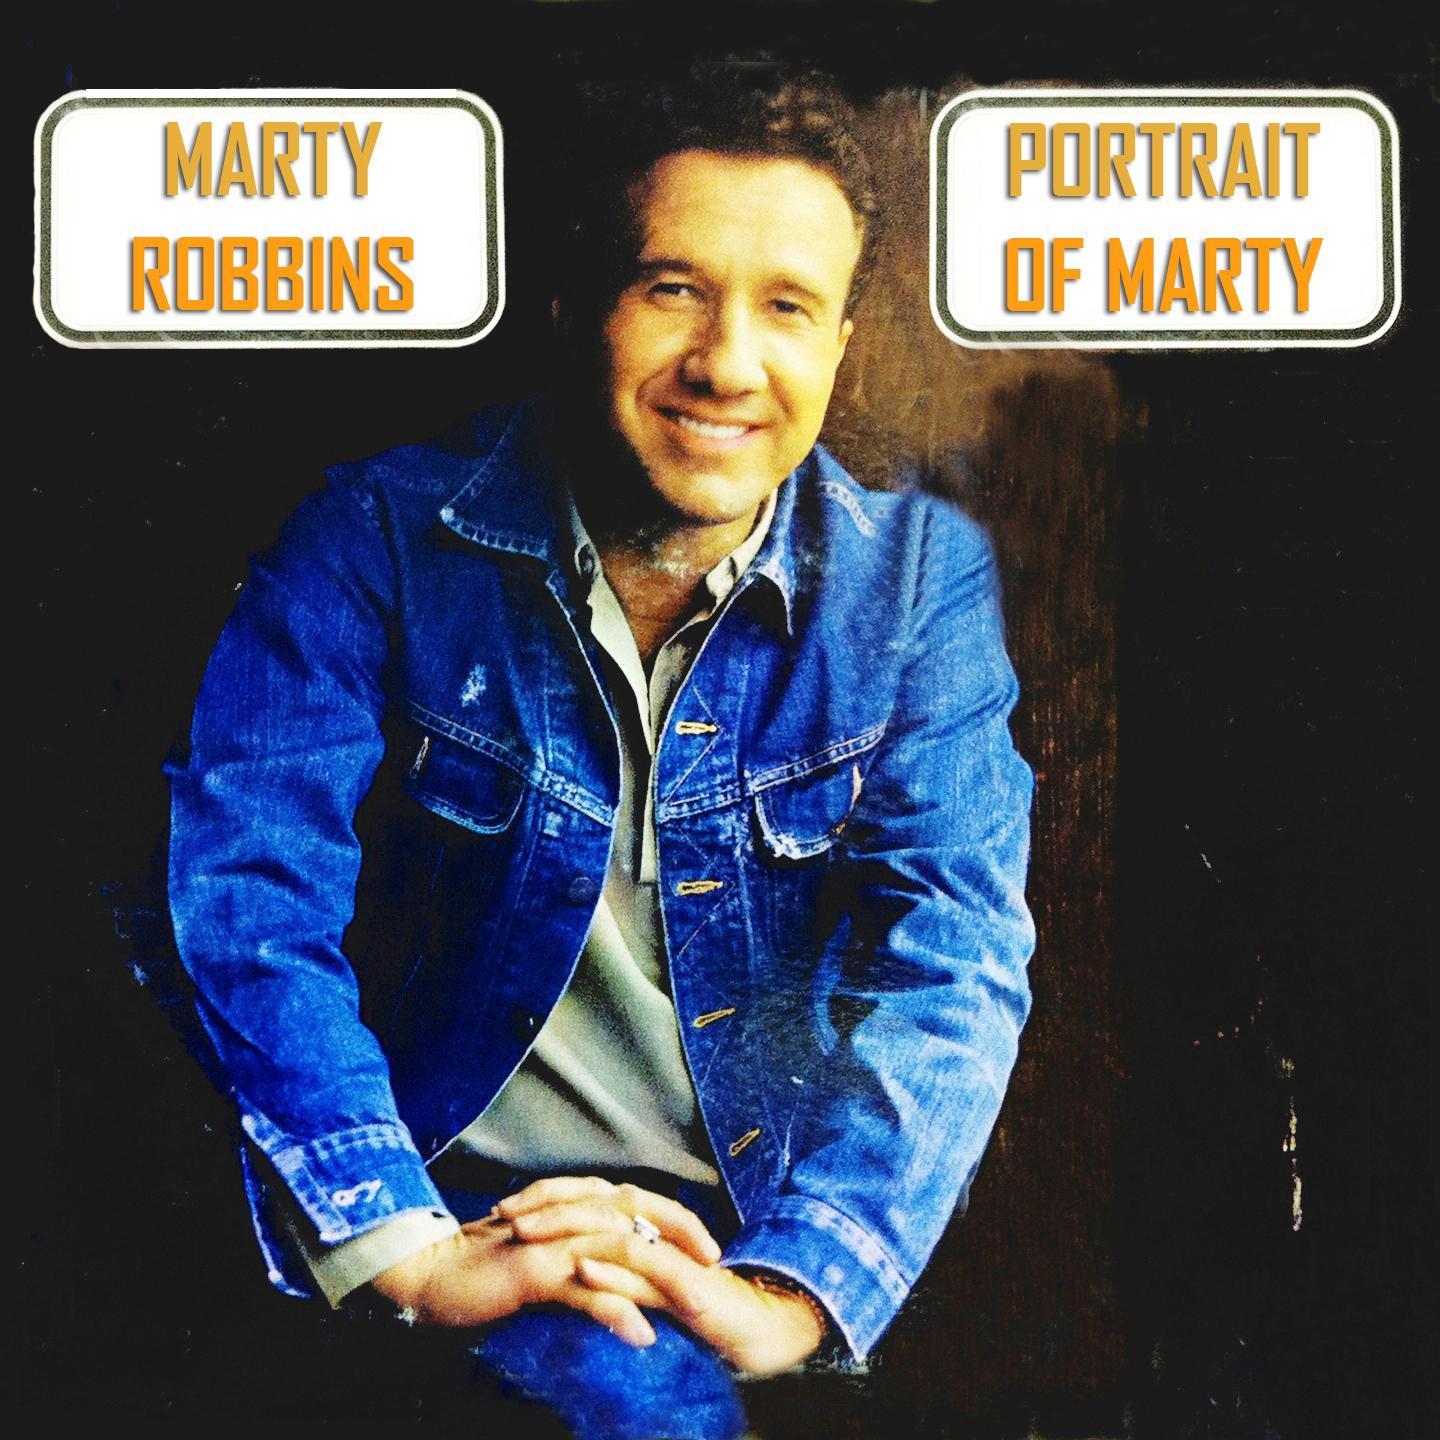 Portrait Of Marty